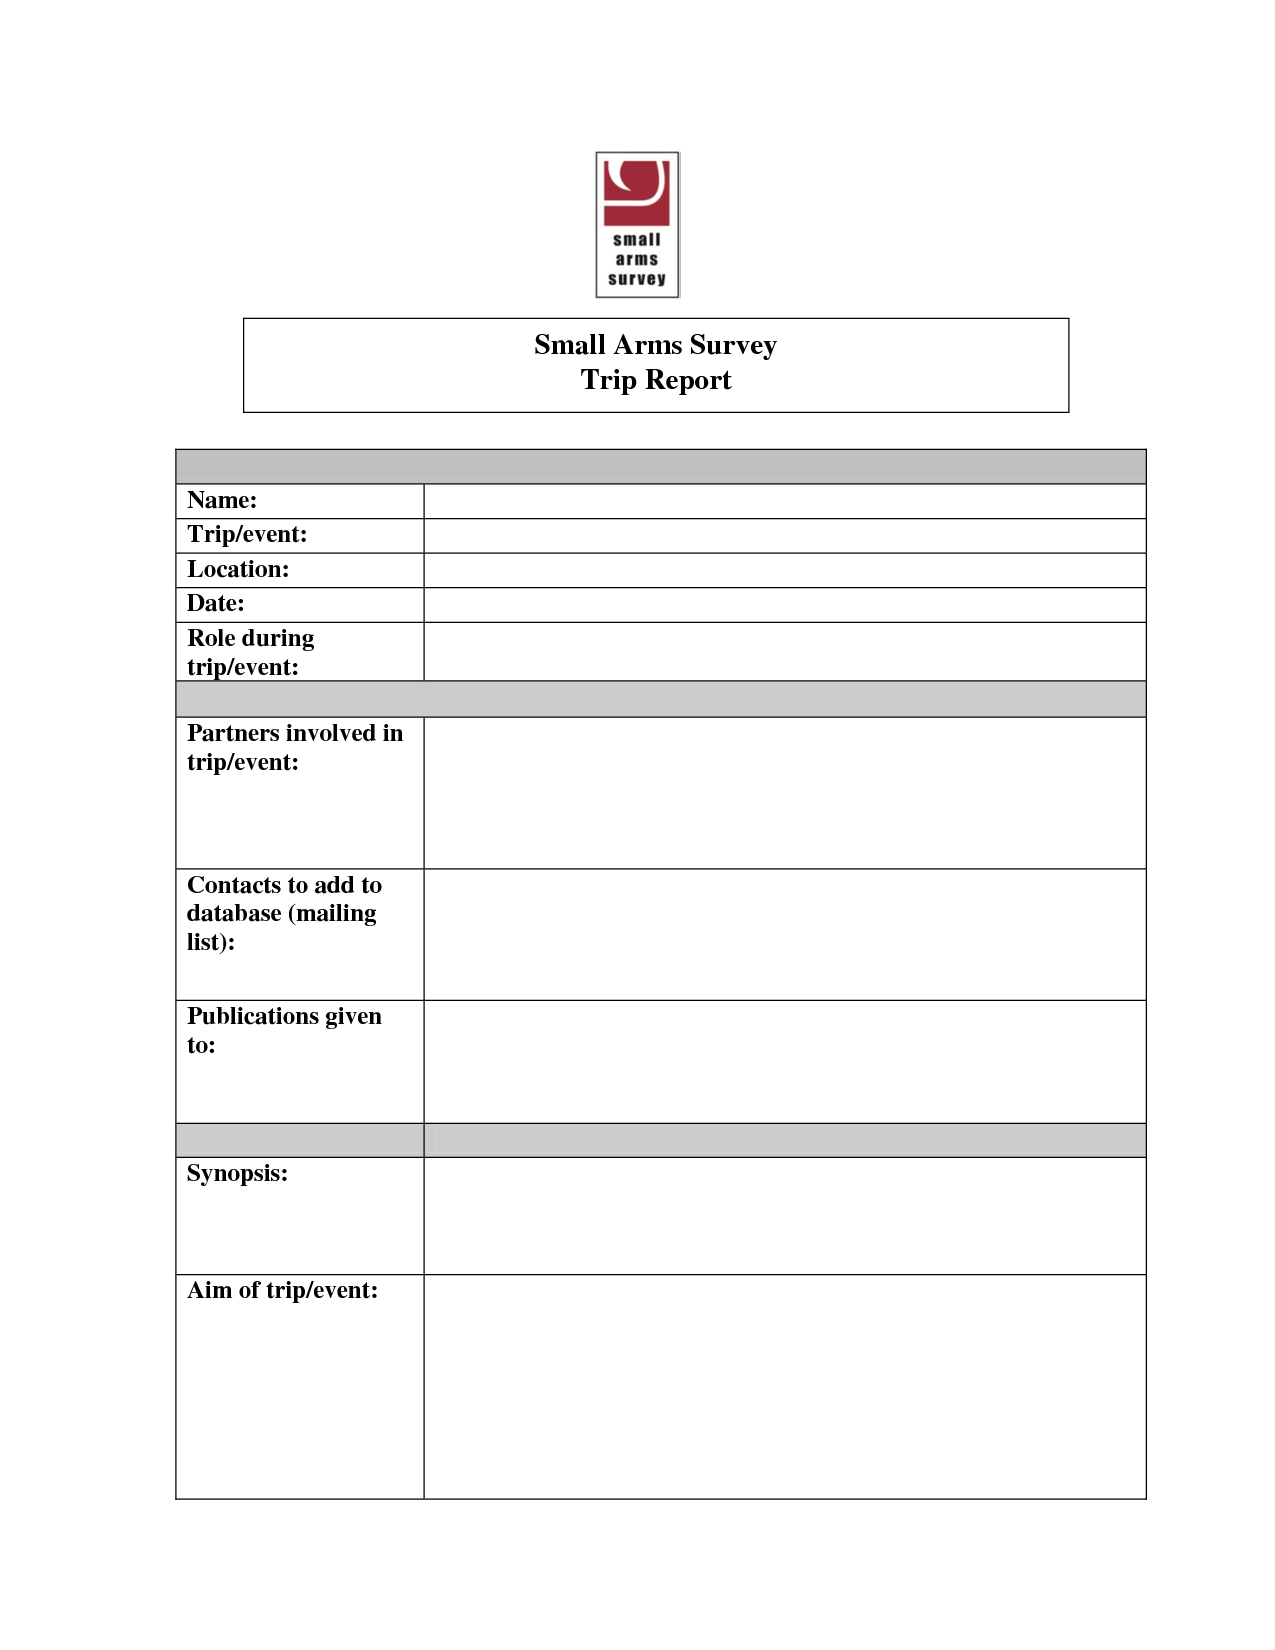 Business Trip Report Template